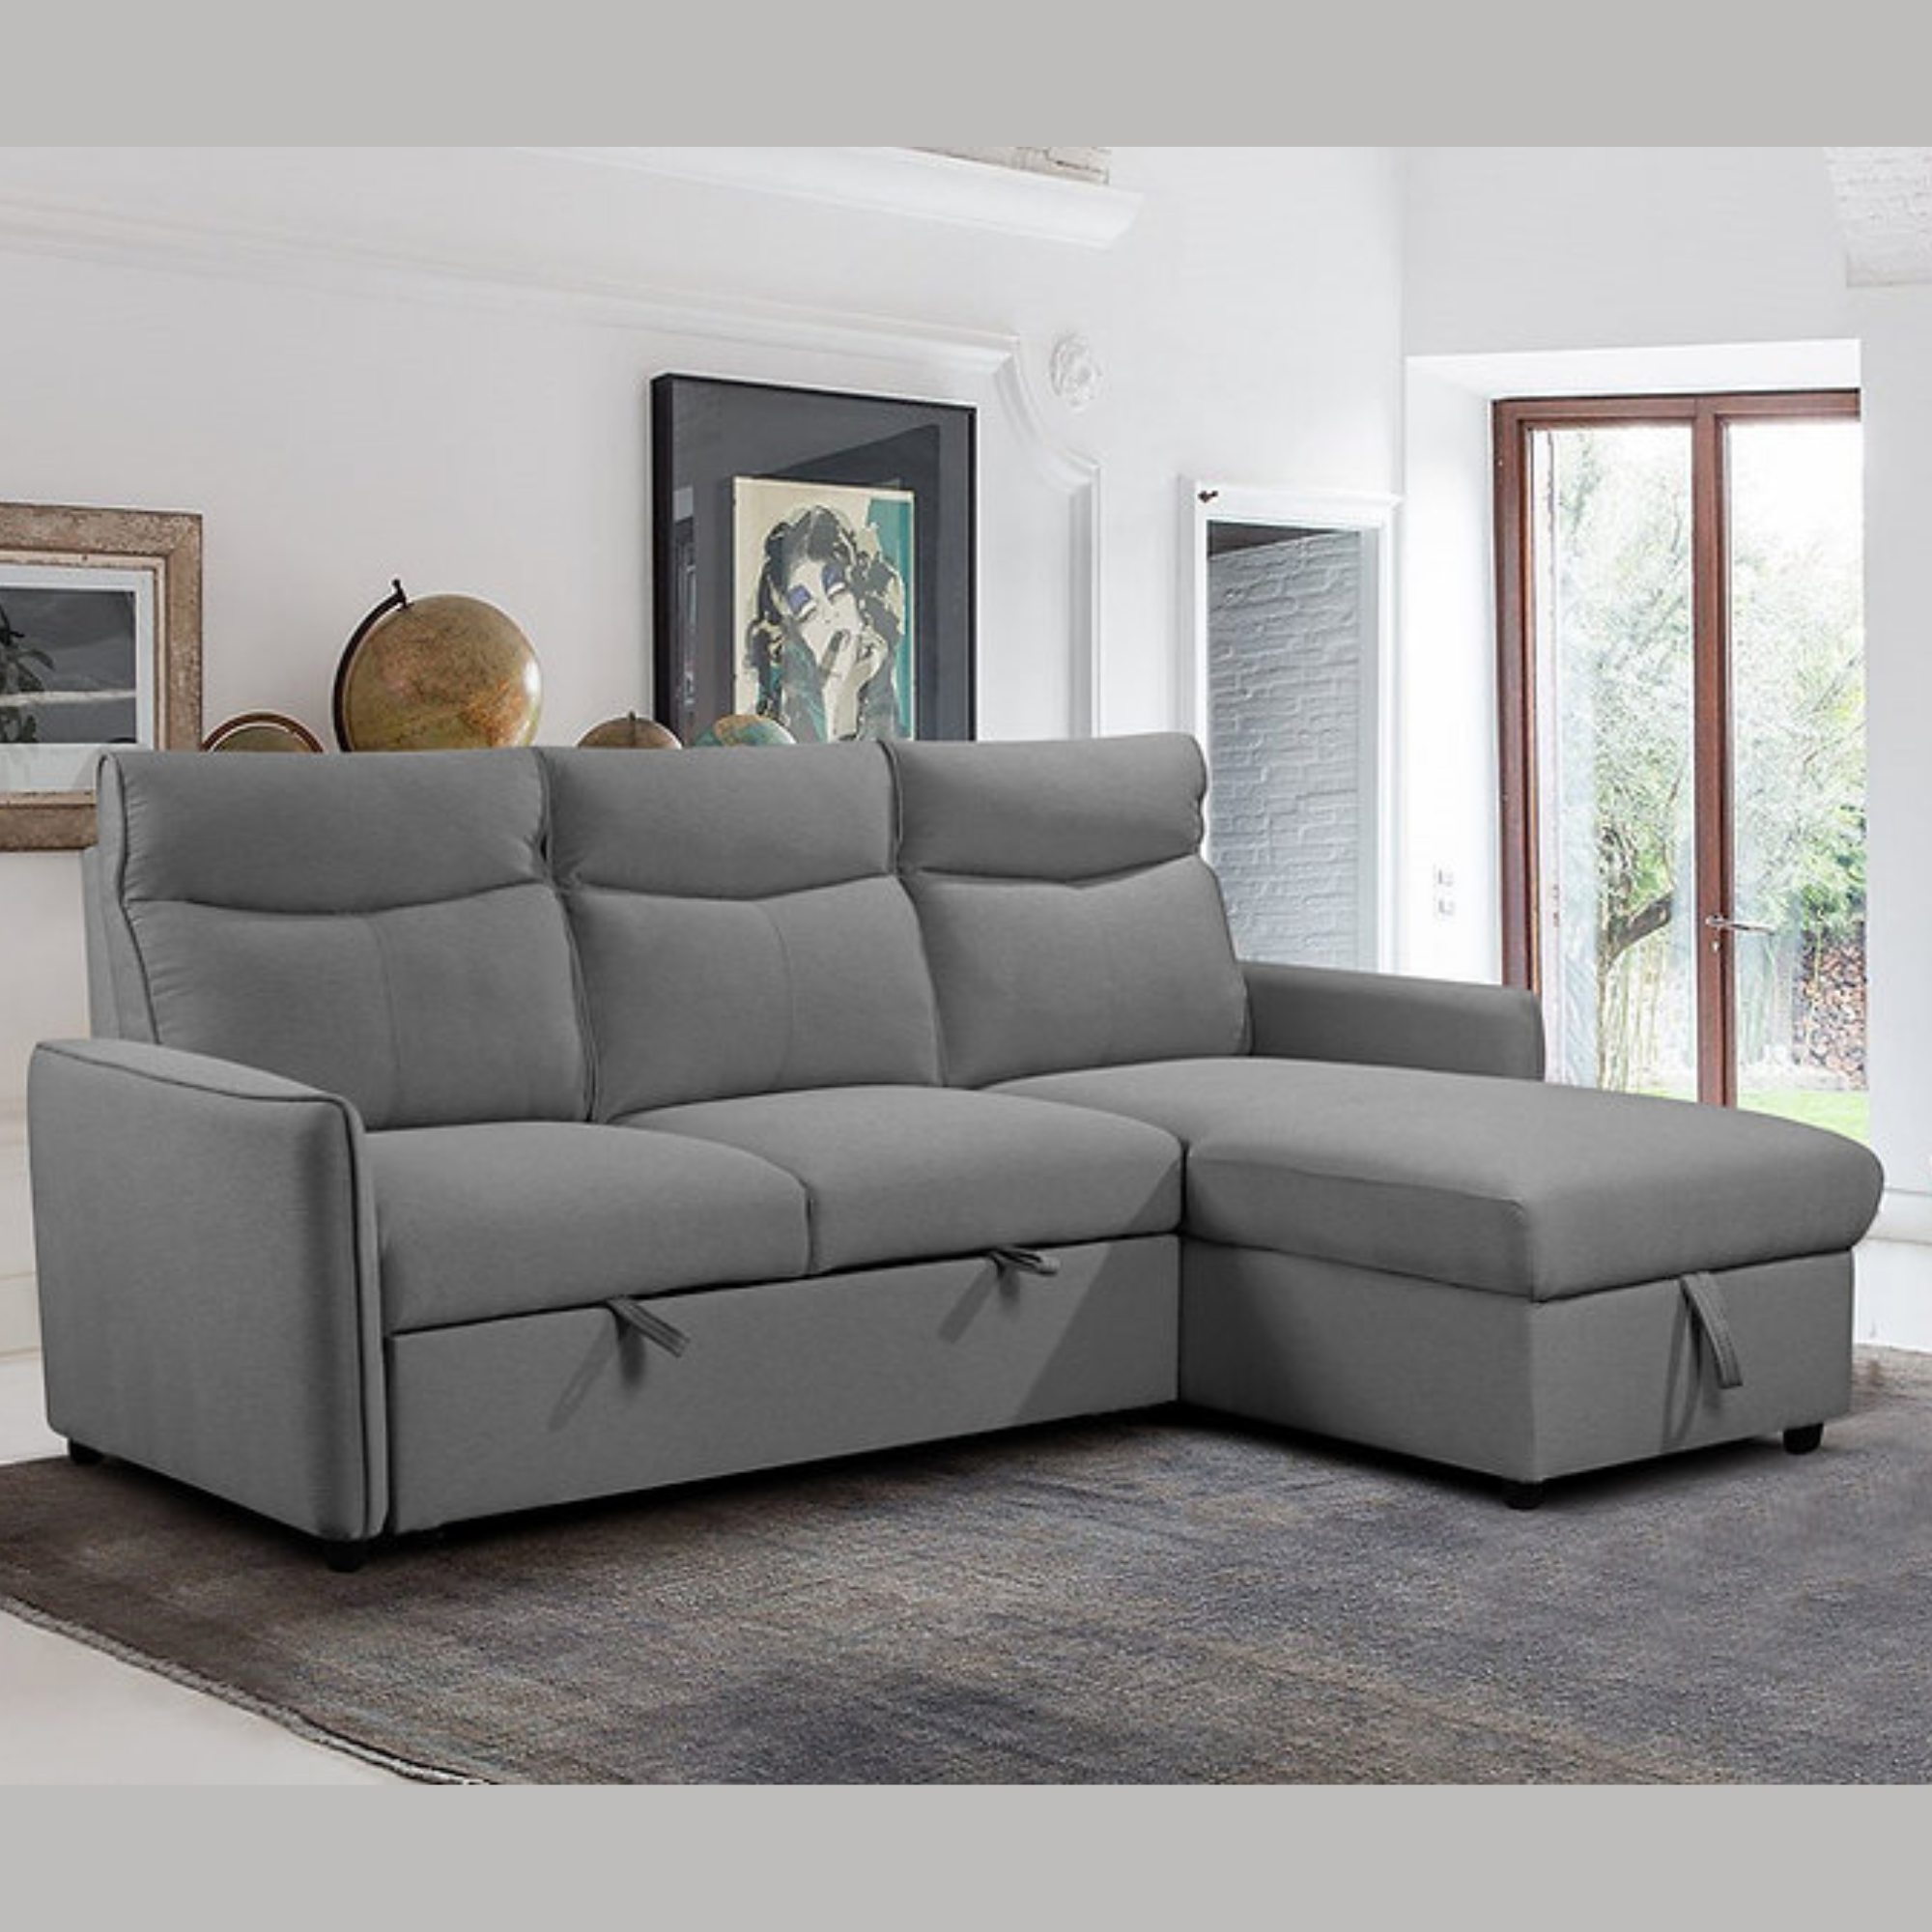 IF-9027 Reversible Chaise Sofa Bed